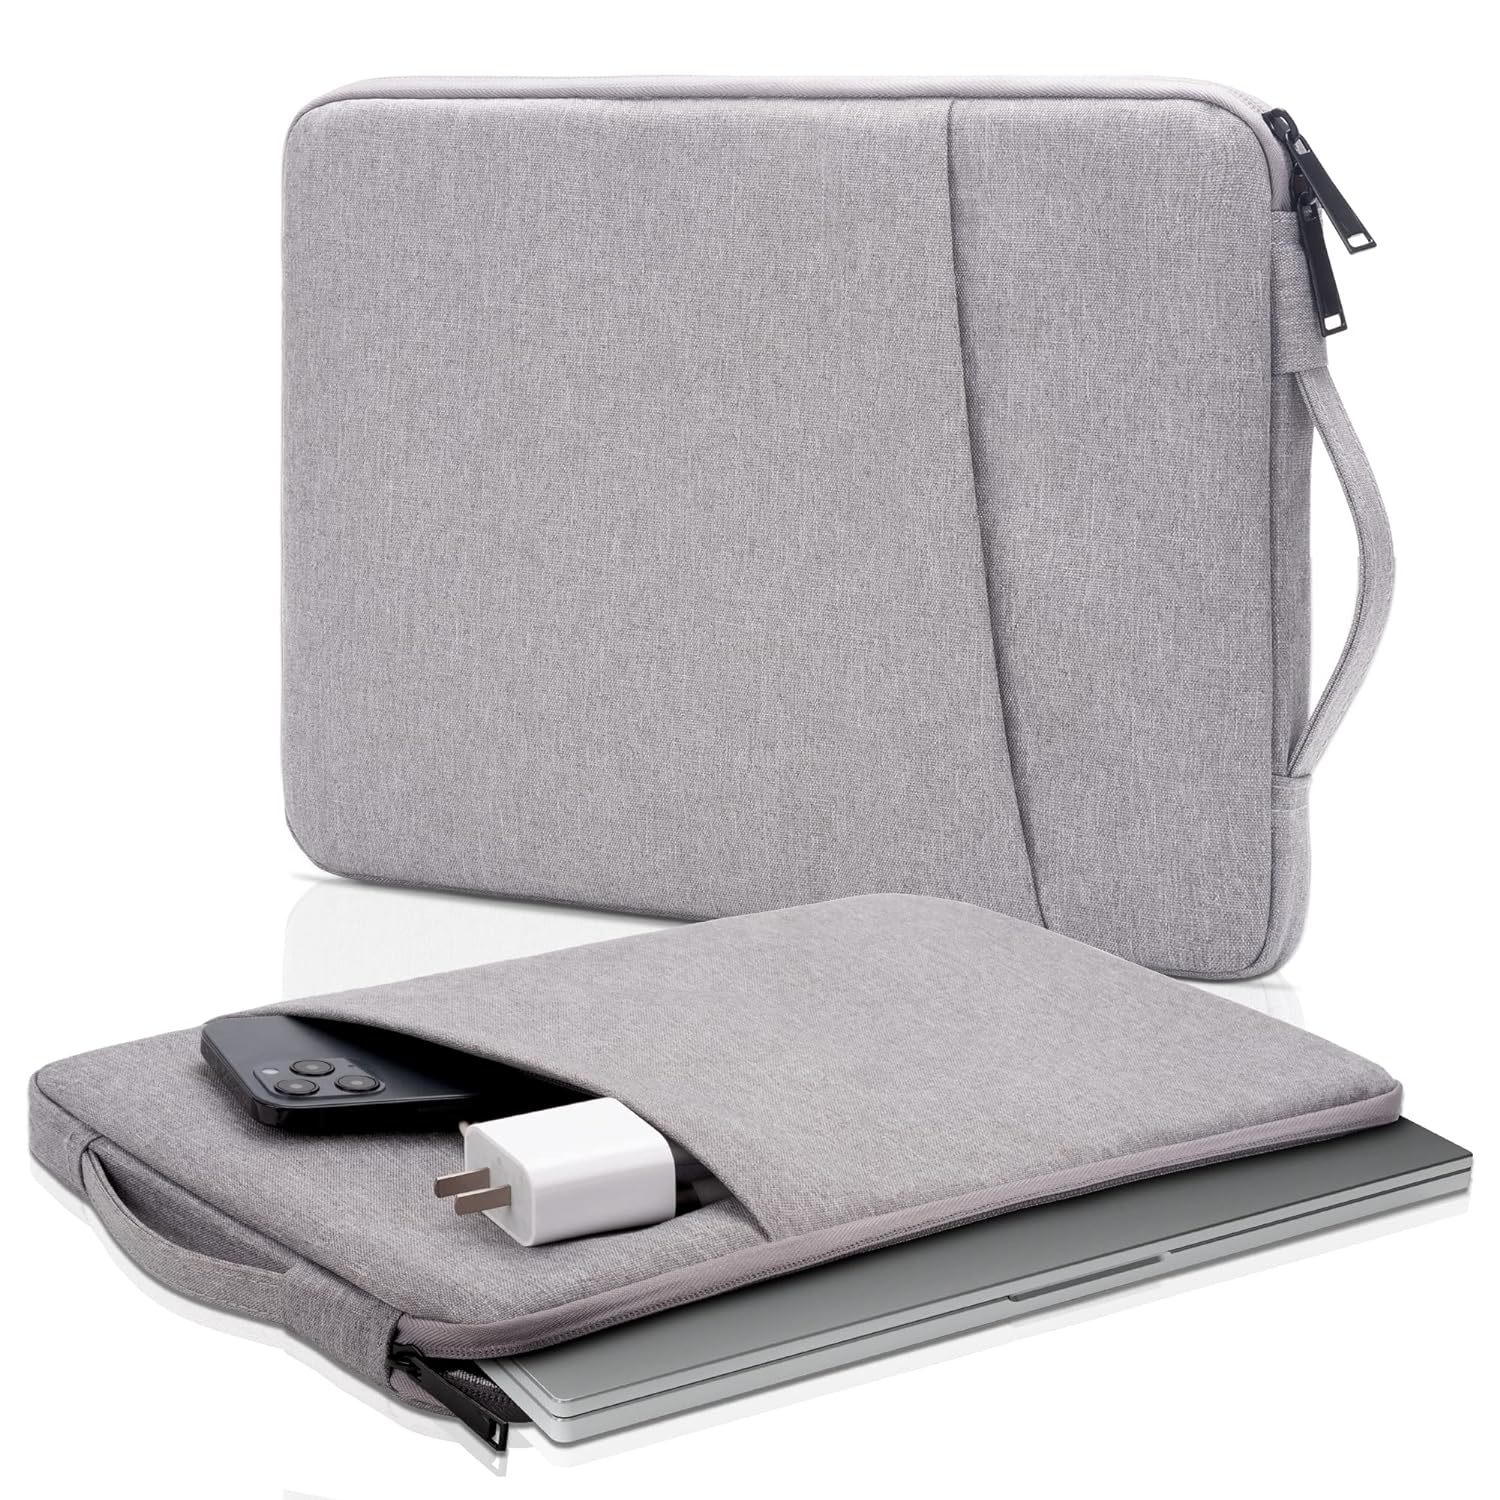 Laptop Sleeve Bag Compatible With 13 Inch Macbook Air Mac Pro M1 Surface Lenovo  - $29.99